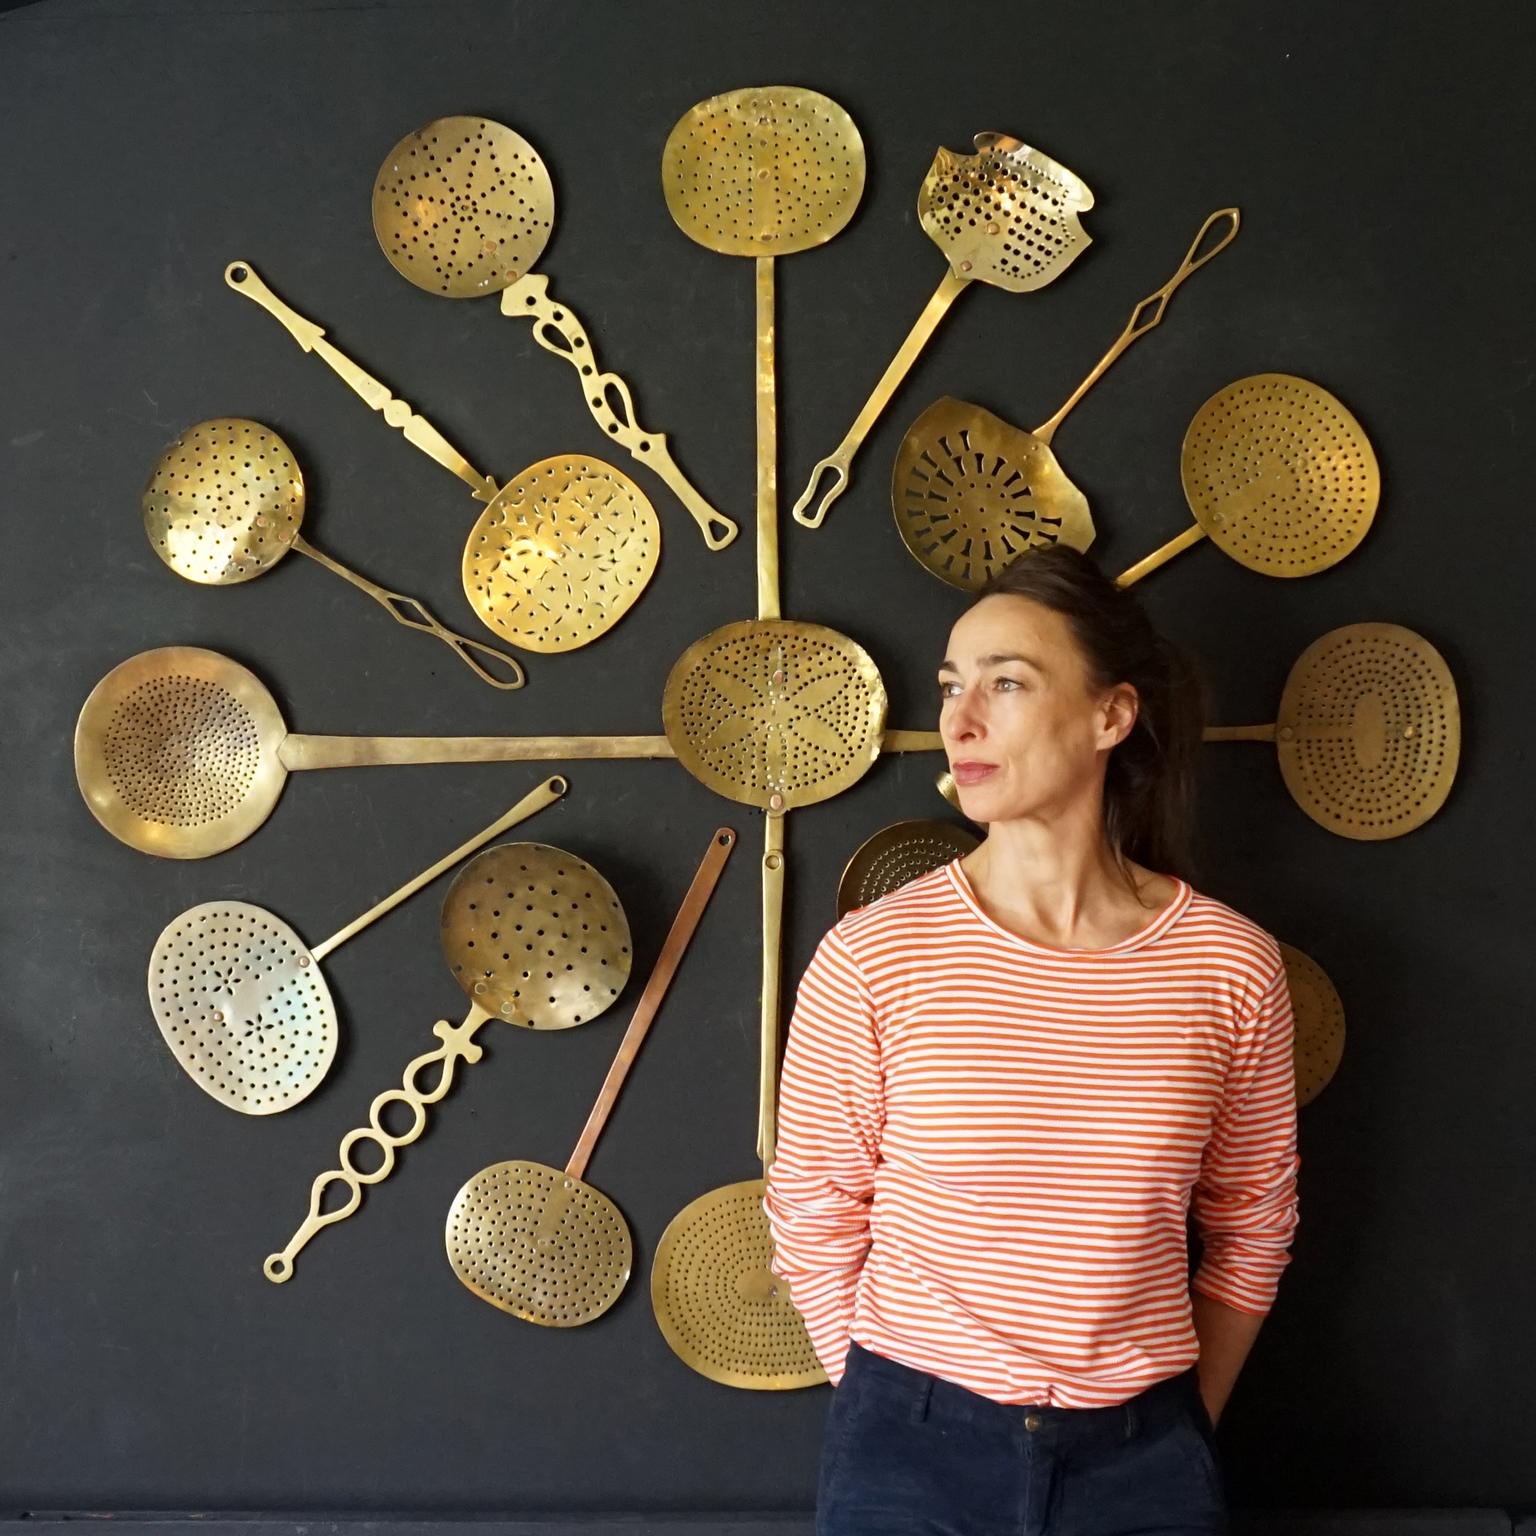 Very pretty set of 17 pieces brass and copper hand made skimmers also know as strainers, seives or colanders. All made in the 19th century by hand either forged, wrought, cast or cut.
Collected from all over Europe until we had enough to present you